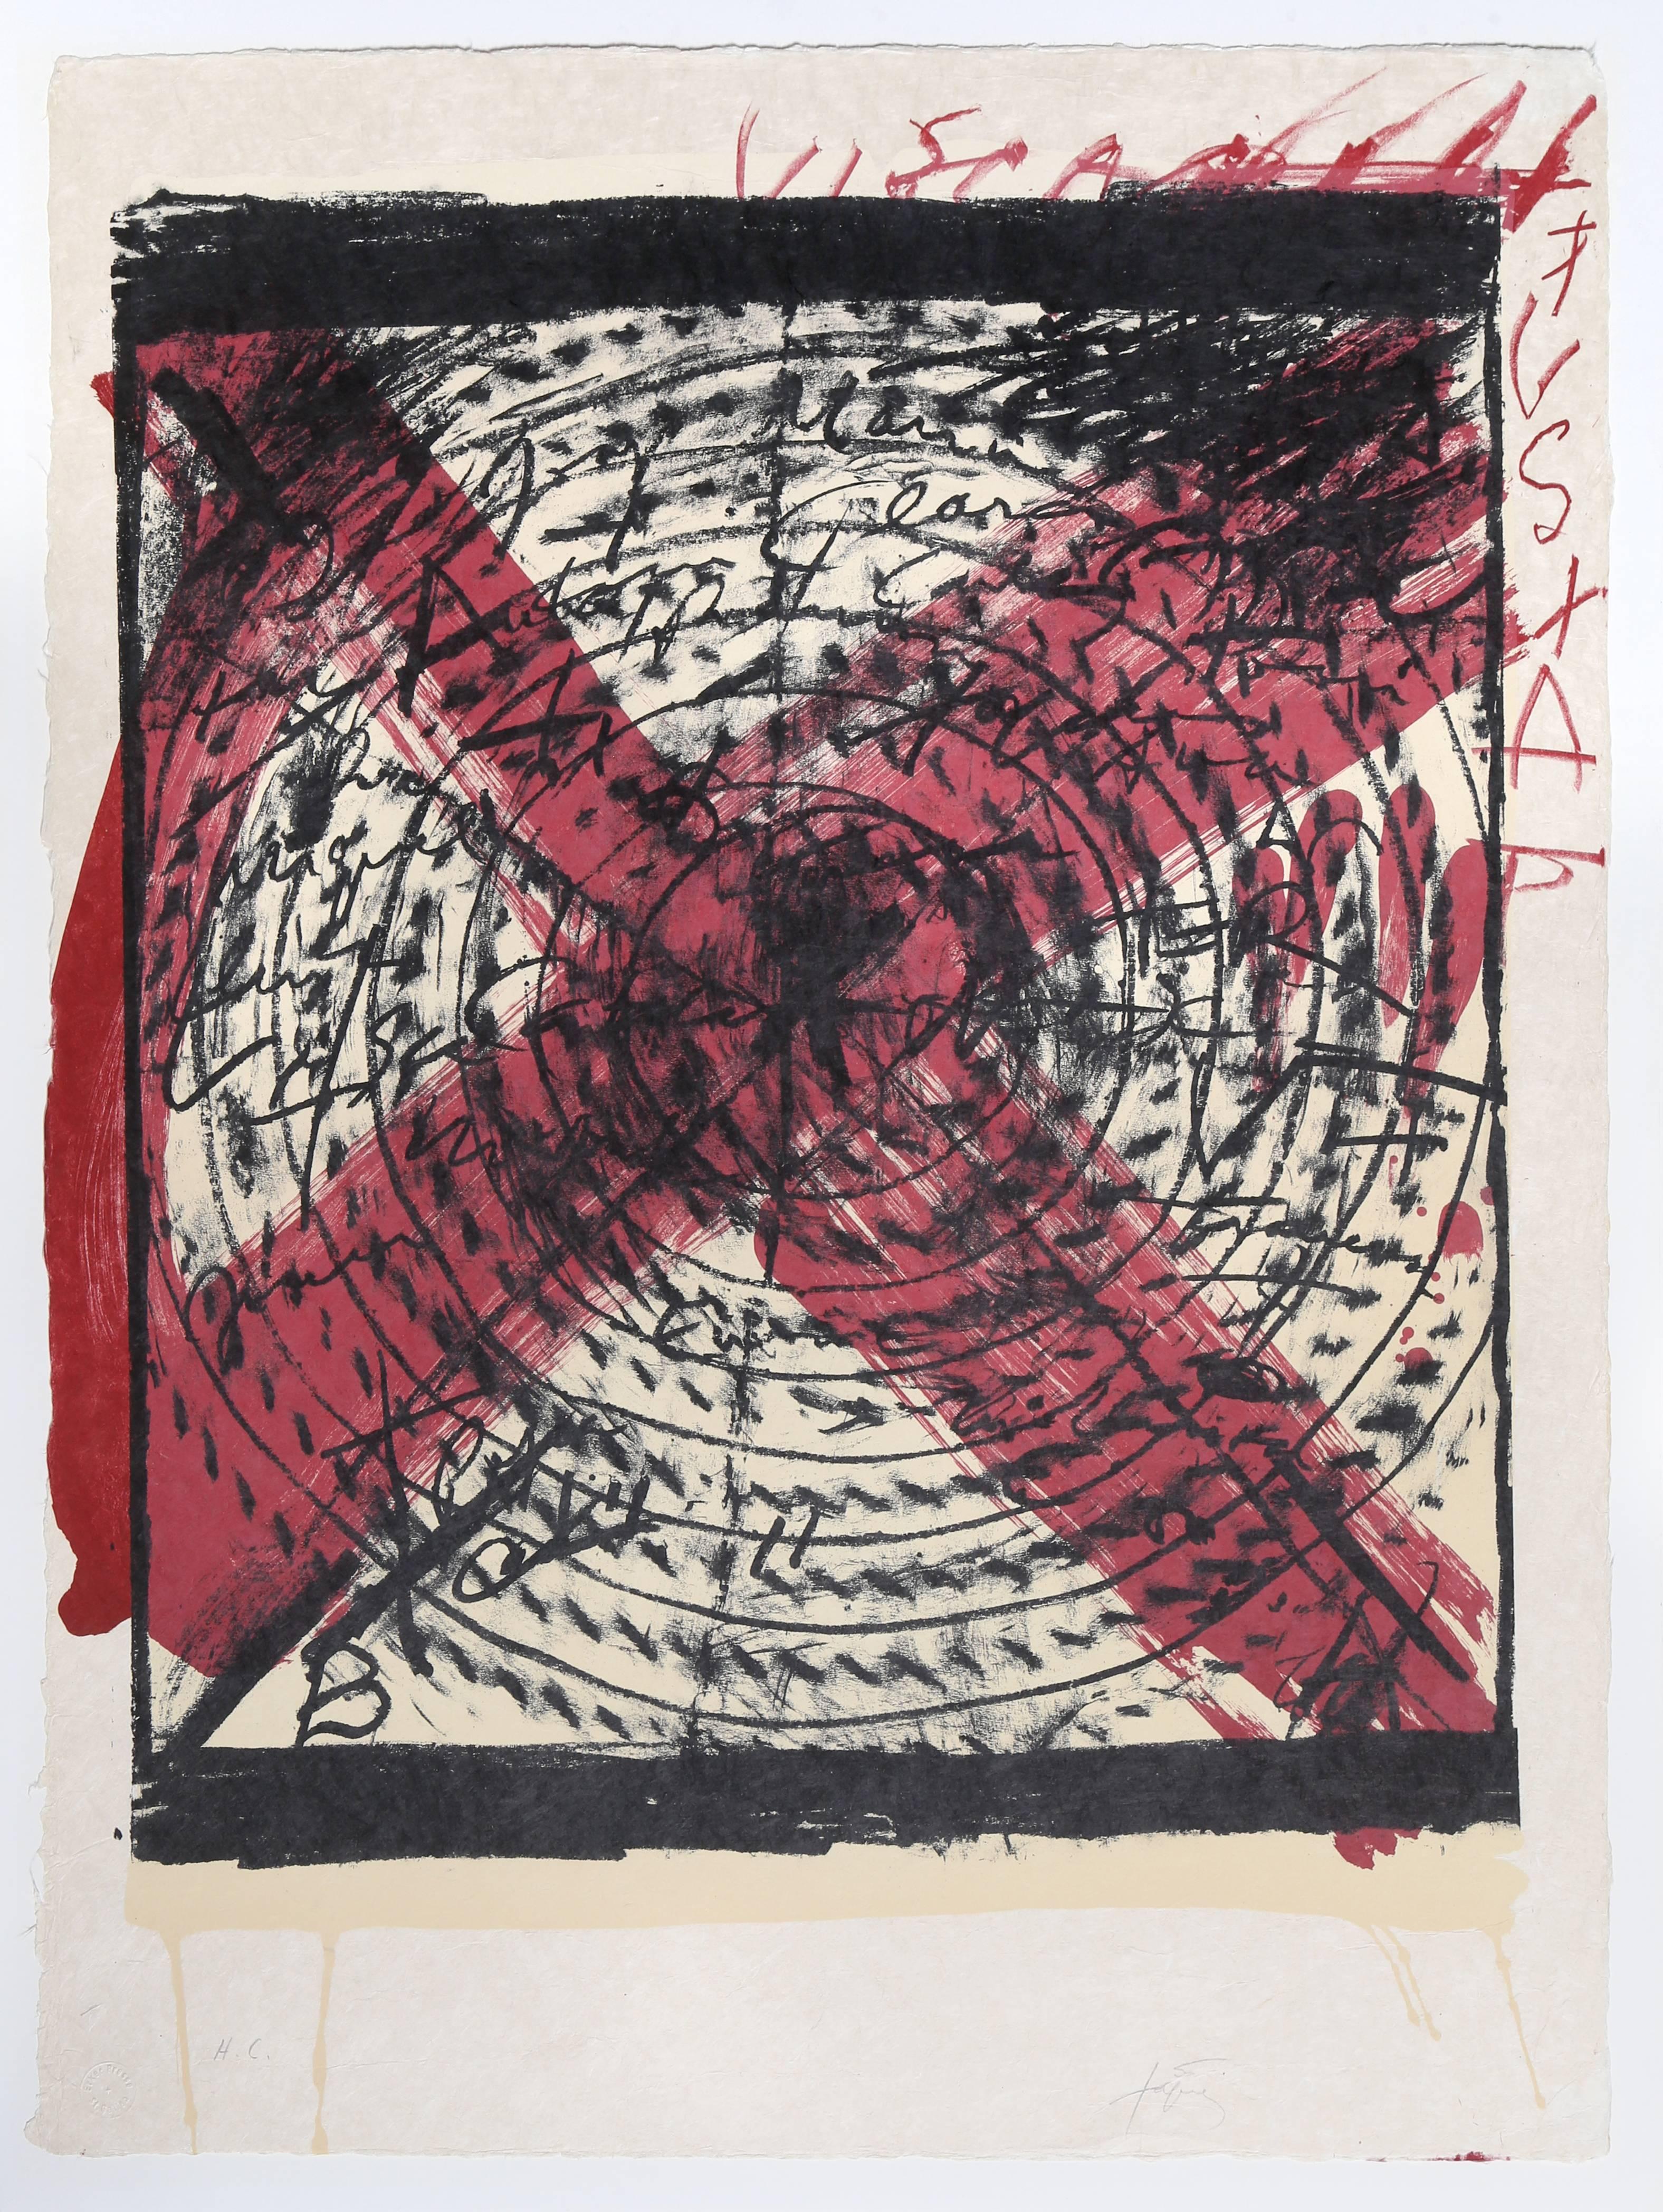 "Diana, " Lithograph on Japon, 1973 by Antoni Tapies